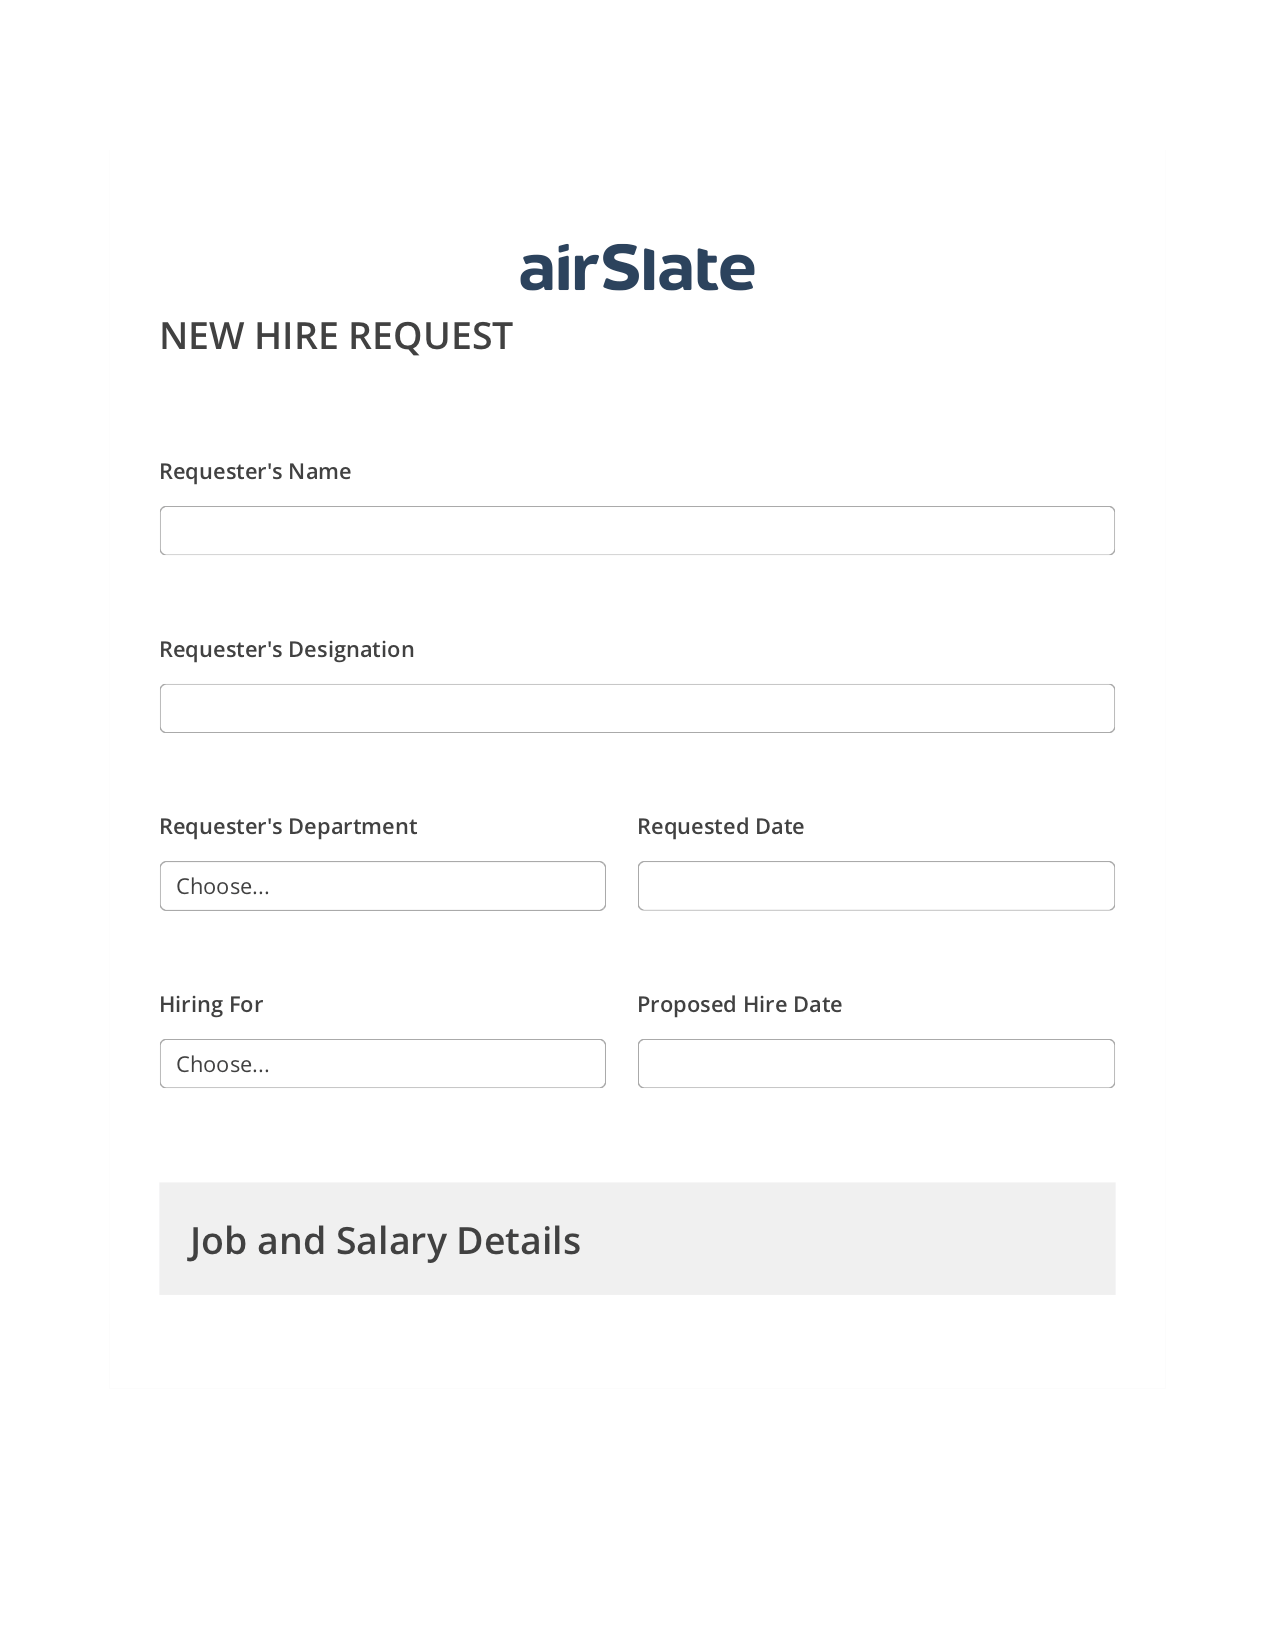 Hiring Request Workflow Pre-fill Dropdowns from Smartsheet Bot, Create NetSuite Record bot, Archive to Google Drive Bot